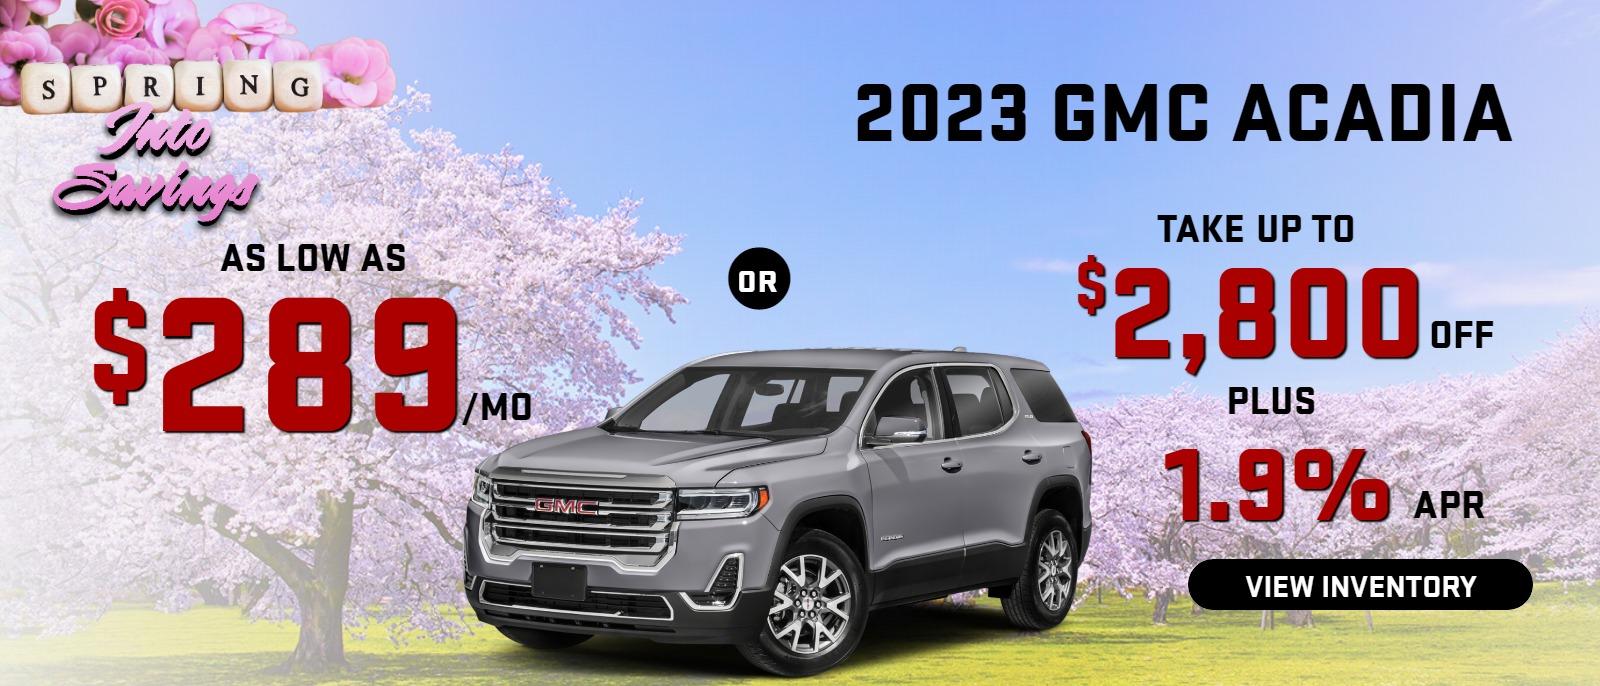 2023 Acadia
Stock G6065
$289/mo
or
take up to $2800 OFF 
PLUS
1.9% finance